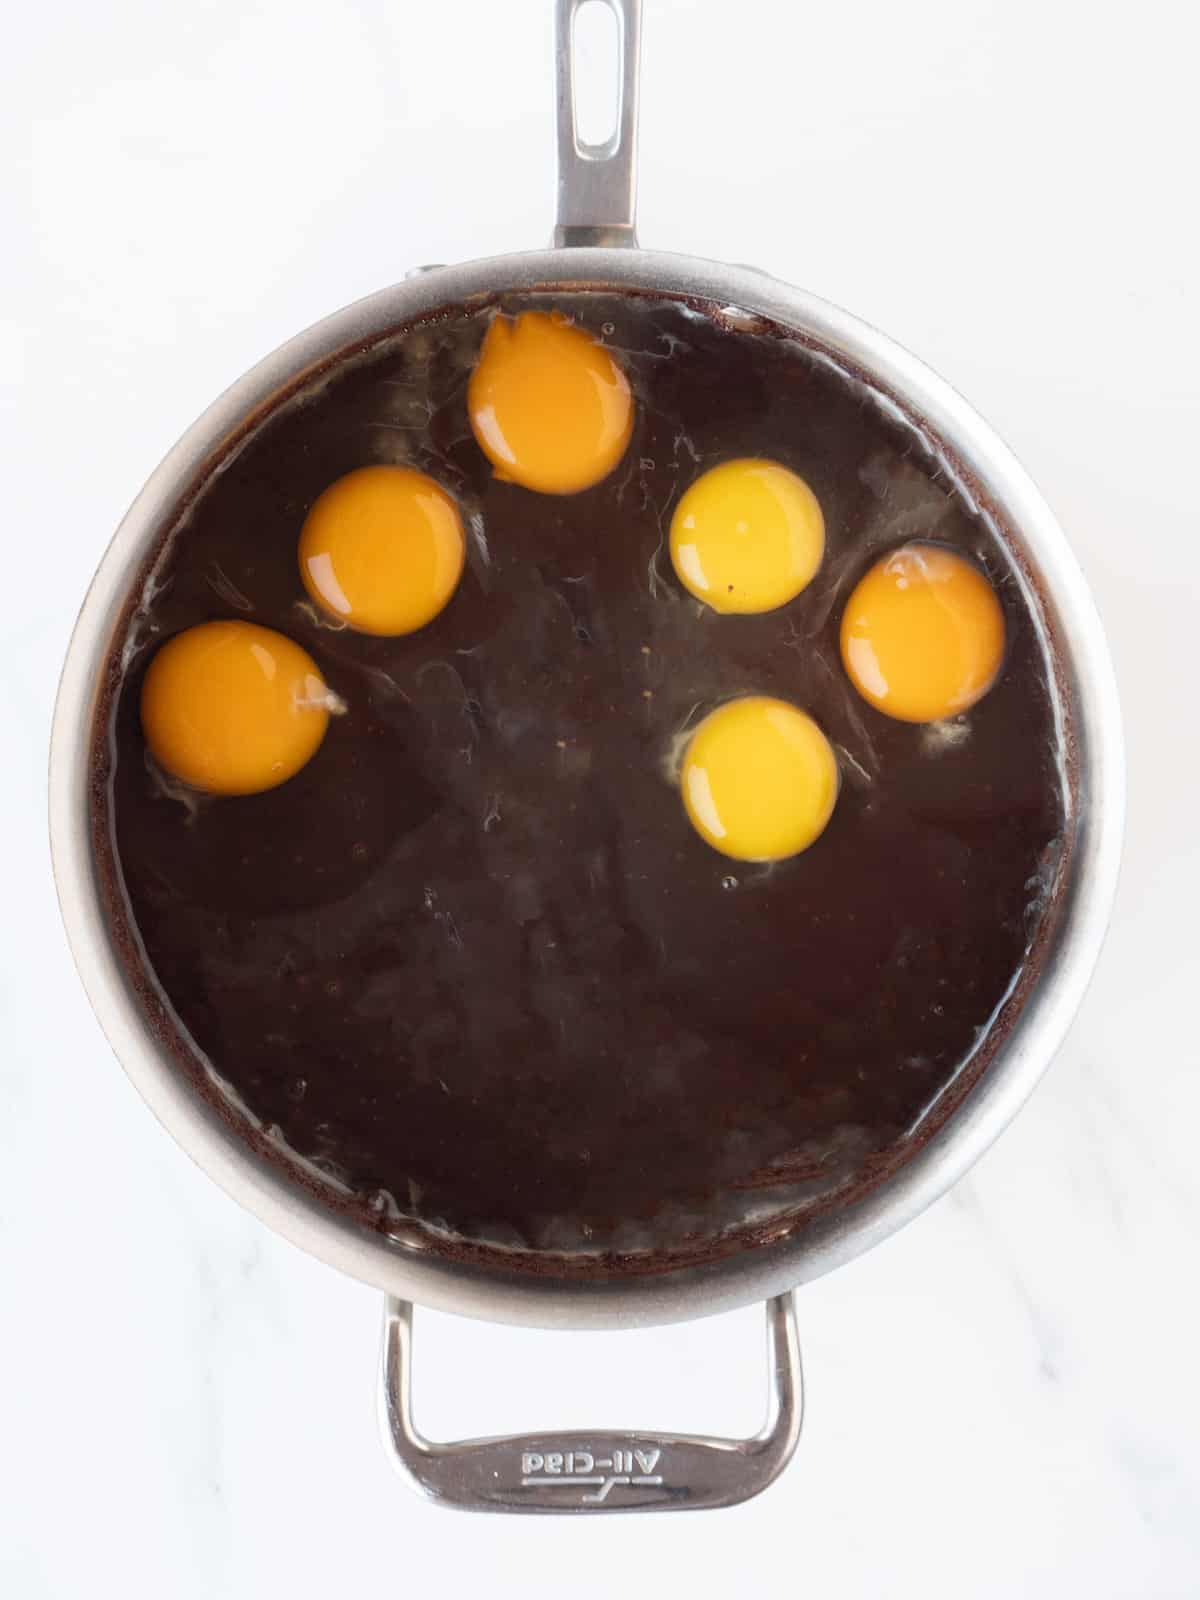 A molten chocolate, butter and sugar mixture, with eggs added.